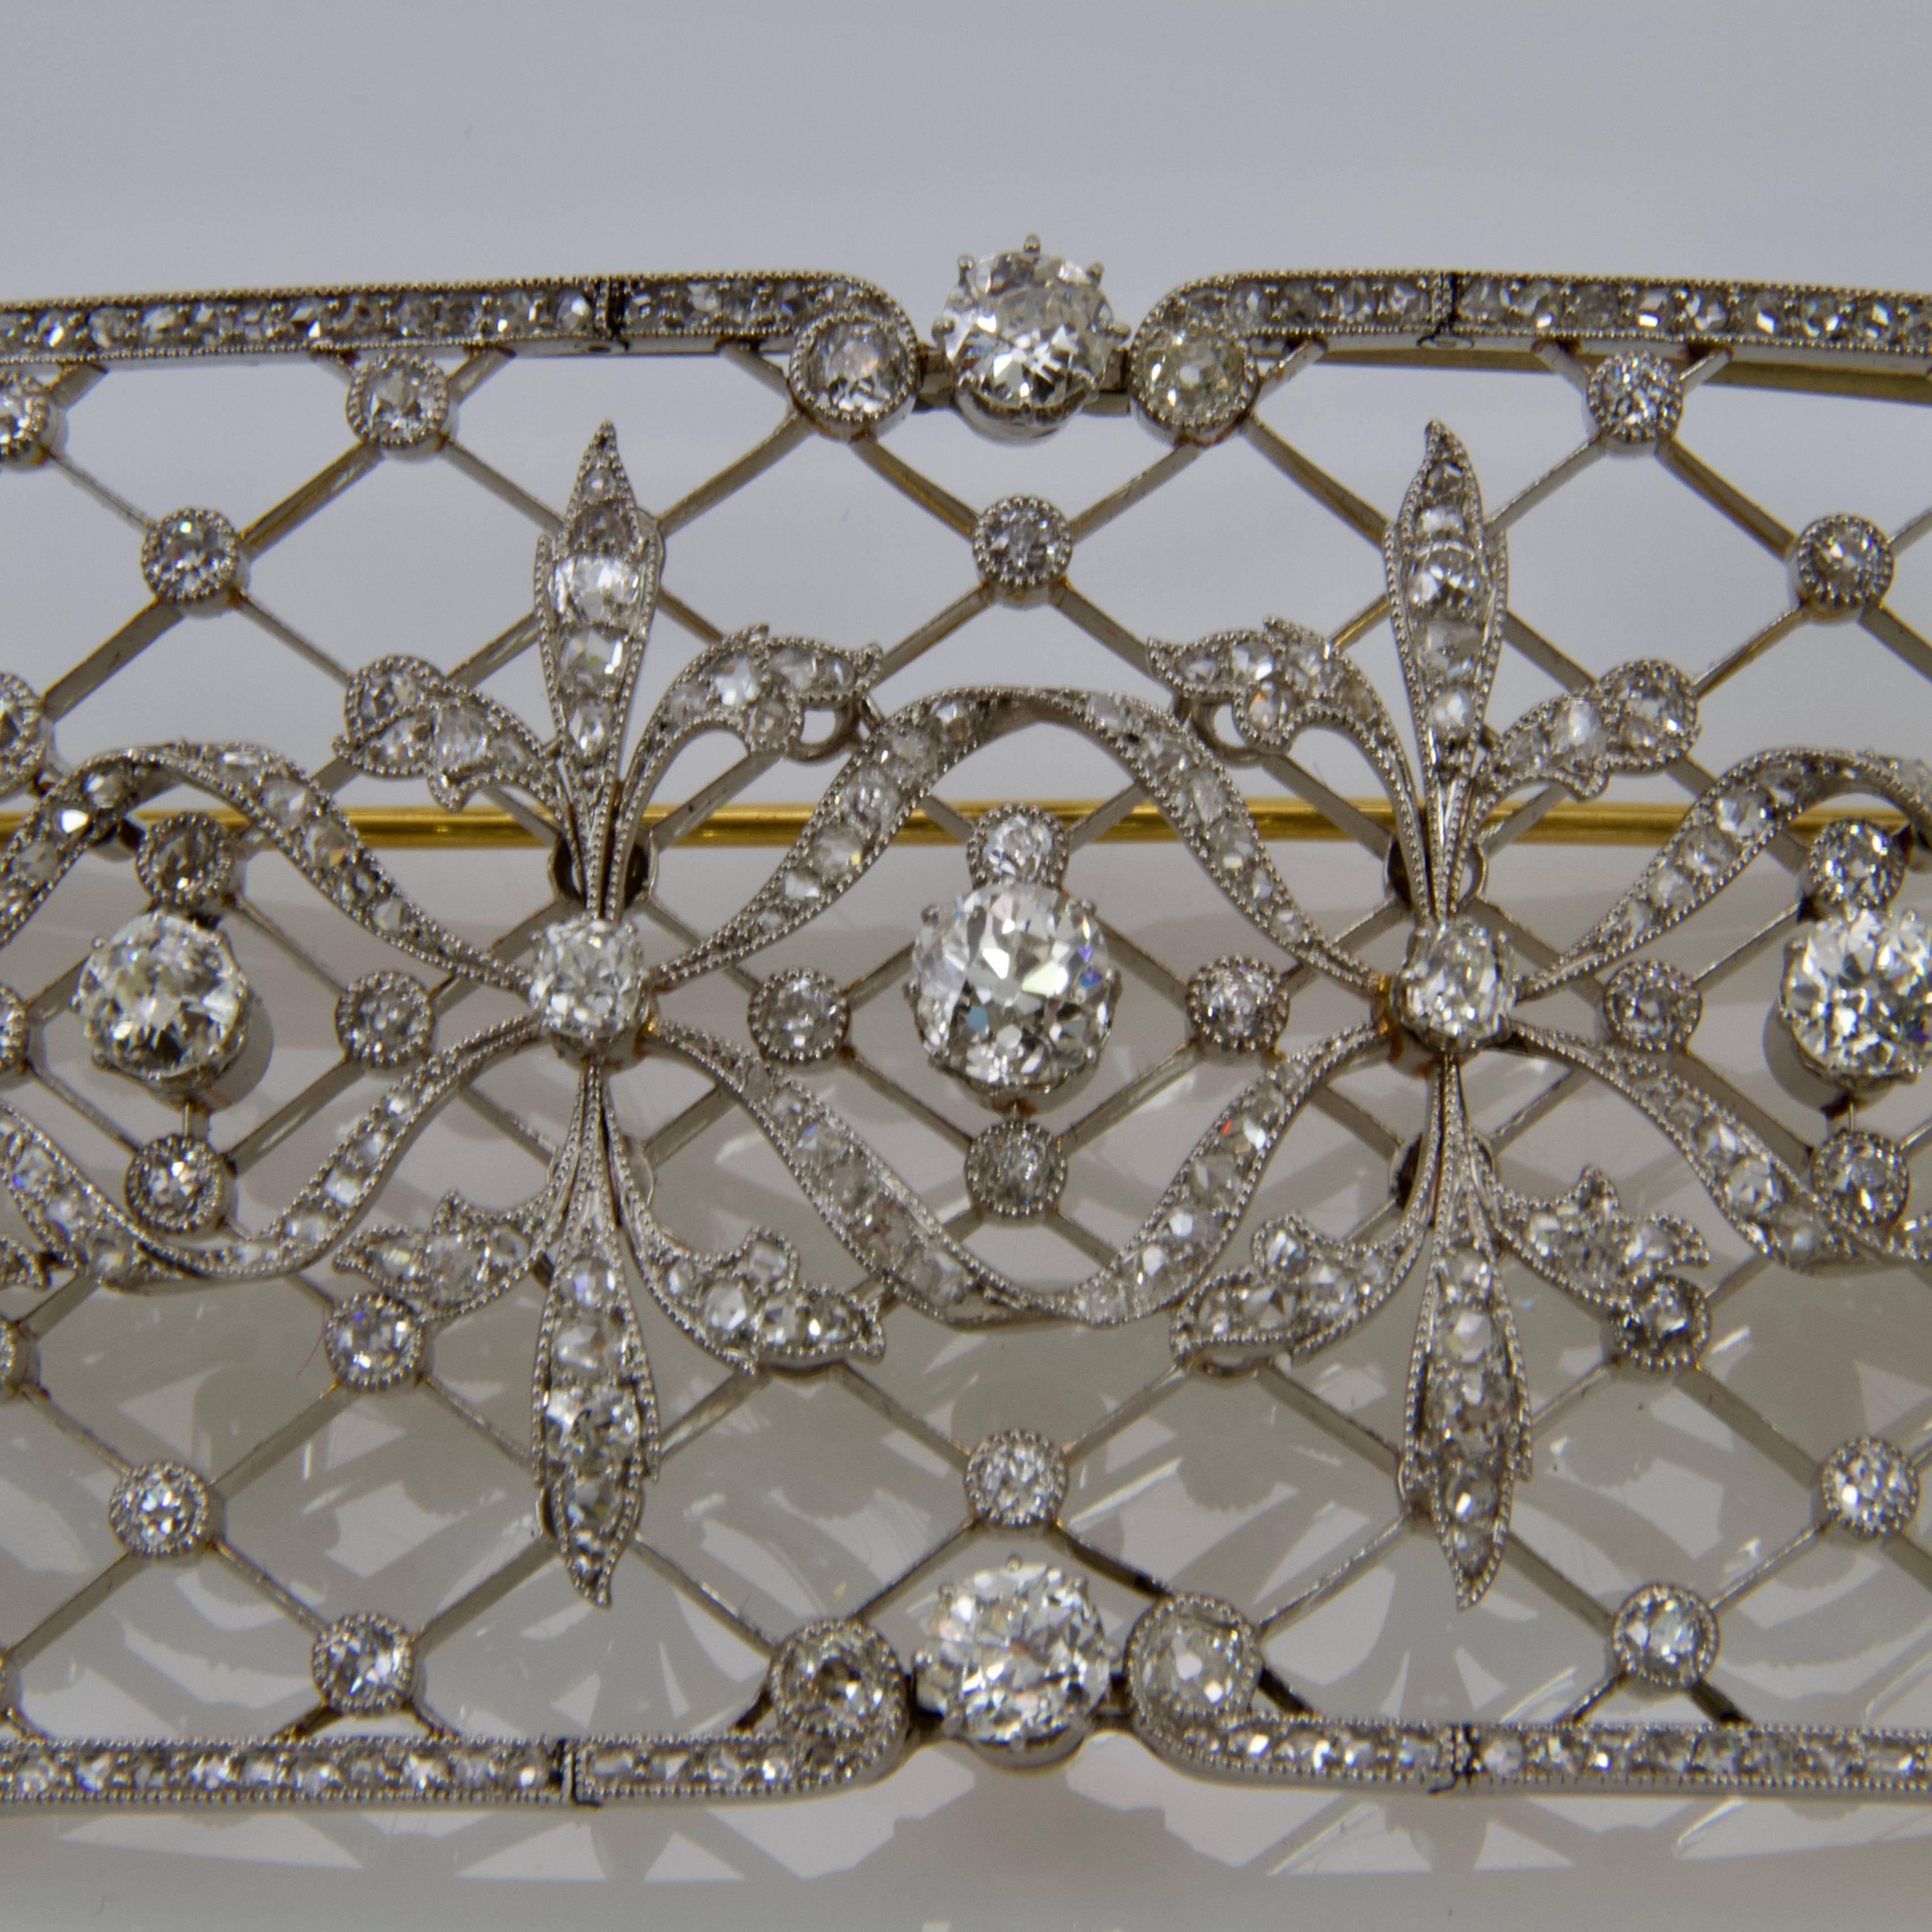 Large unusual gold and platinum stomacher brooch. Openwork structure with latticed decor, leaves pattern in 